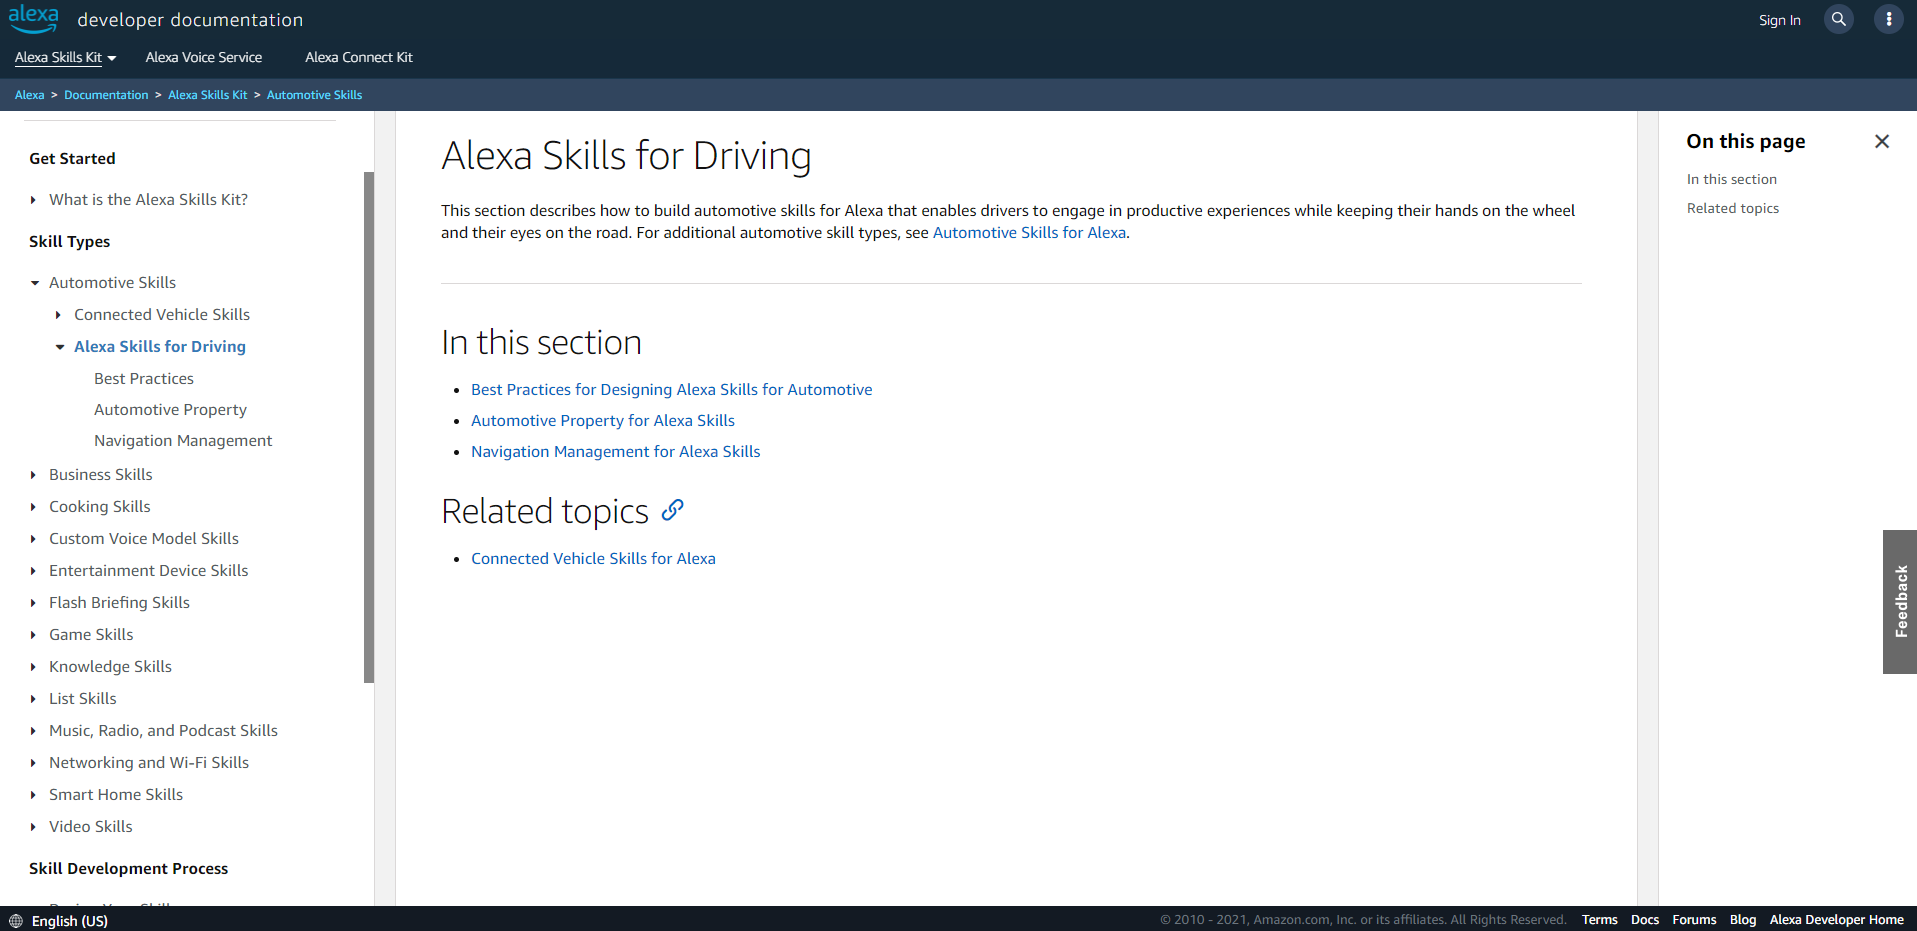 About Alexa Skills for Driving - Technical Documentation